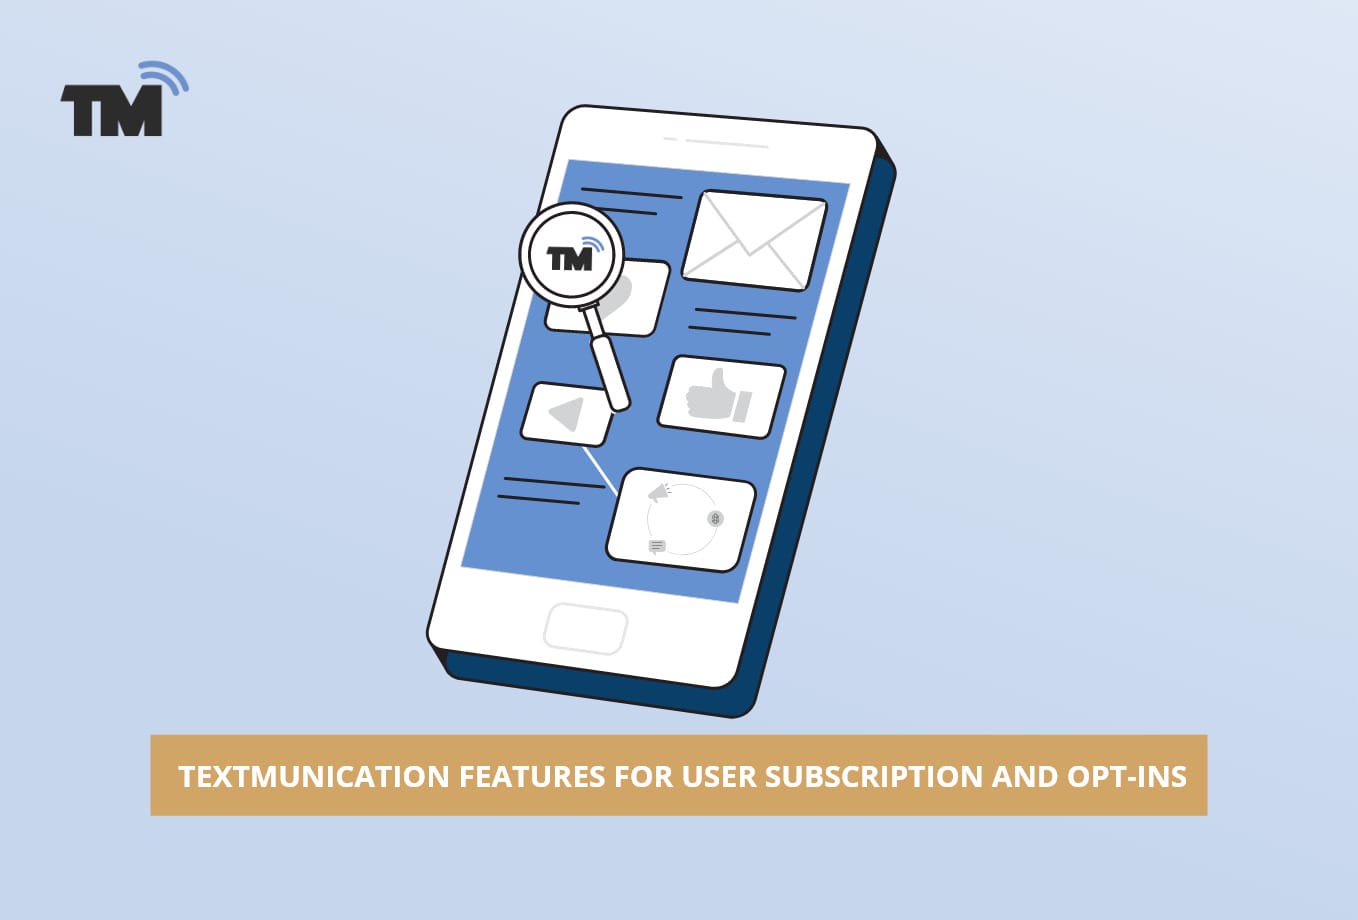 Textmunication Features for User Subscription and Opt-Ins